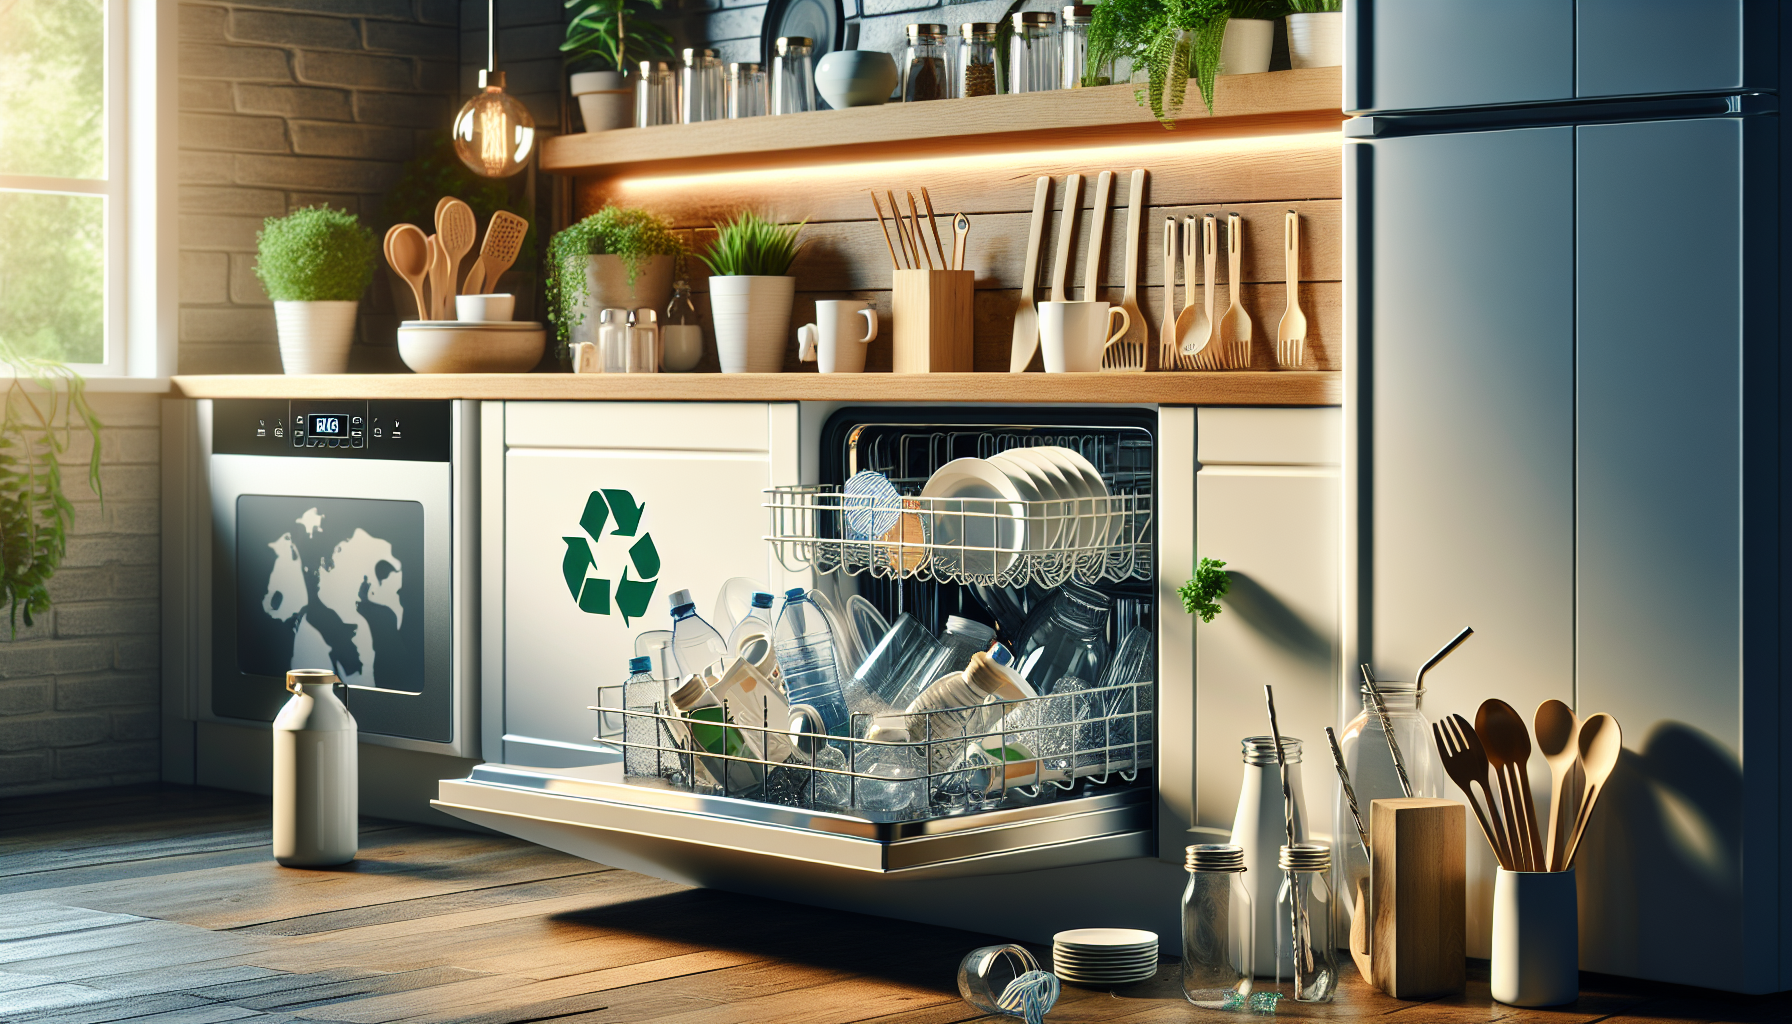 Top Ways To Reduce Plastic Waste With Your Dishwasher